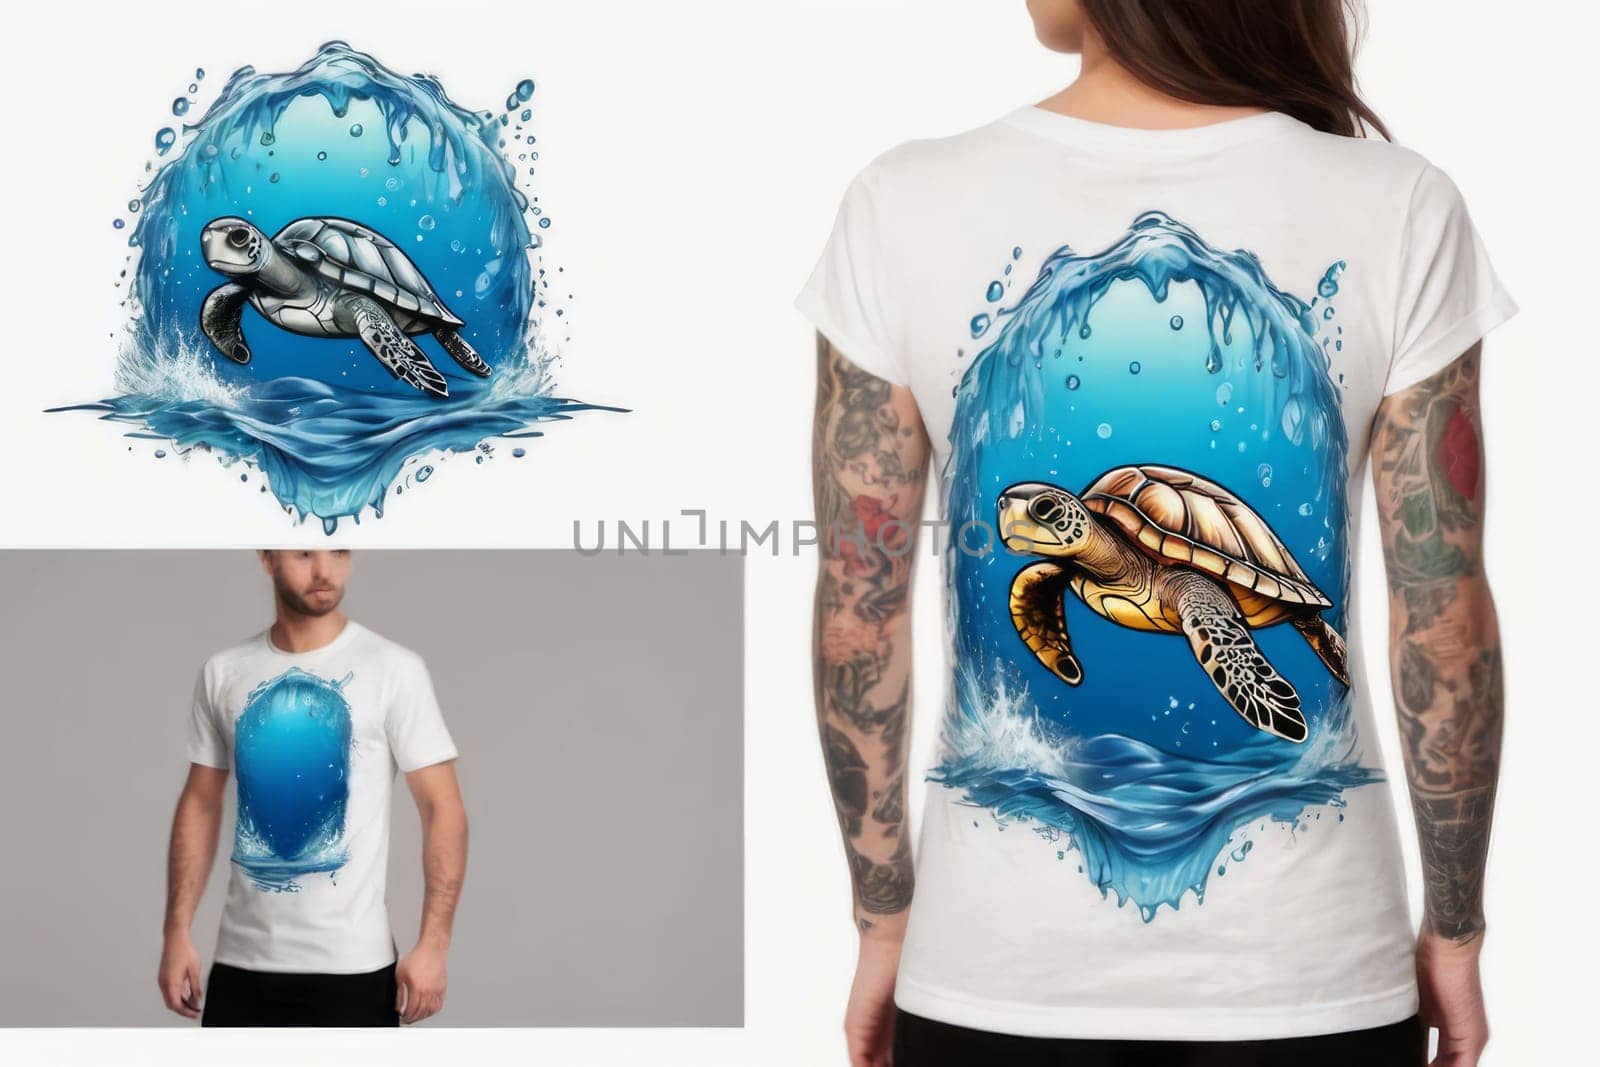 Turtle printed on vivid blue t-shirt, capturing essence of marine tranquility. For clothing design, animal themed clothing advertising, as illustration for interesting clothing style, Tshirt print